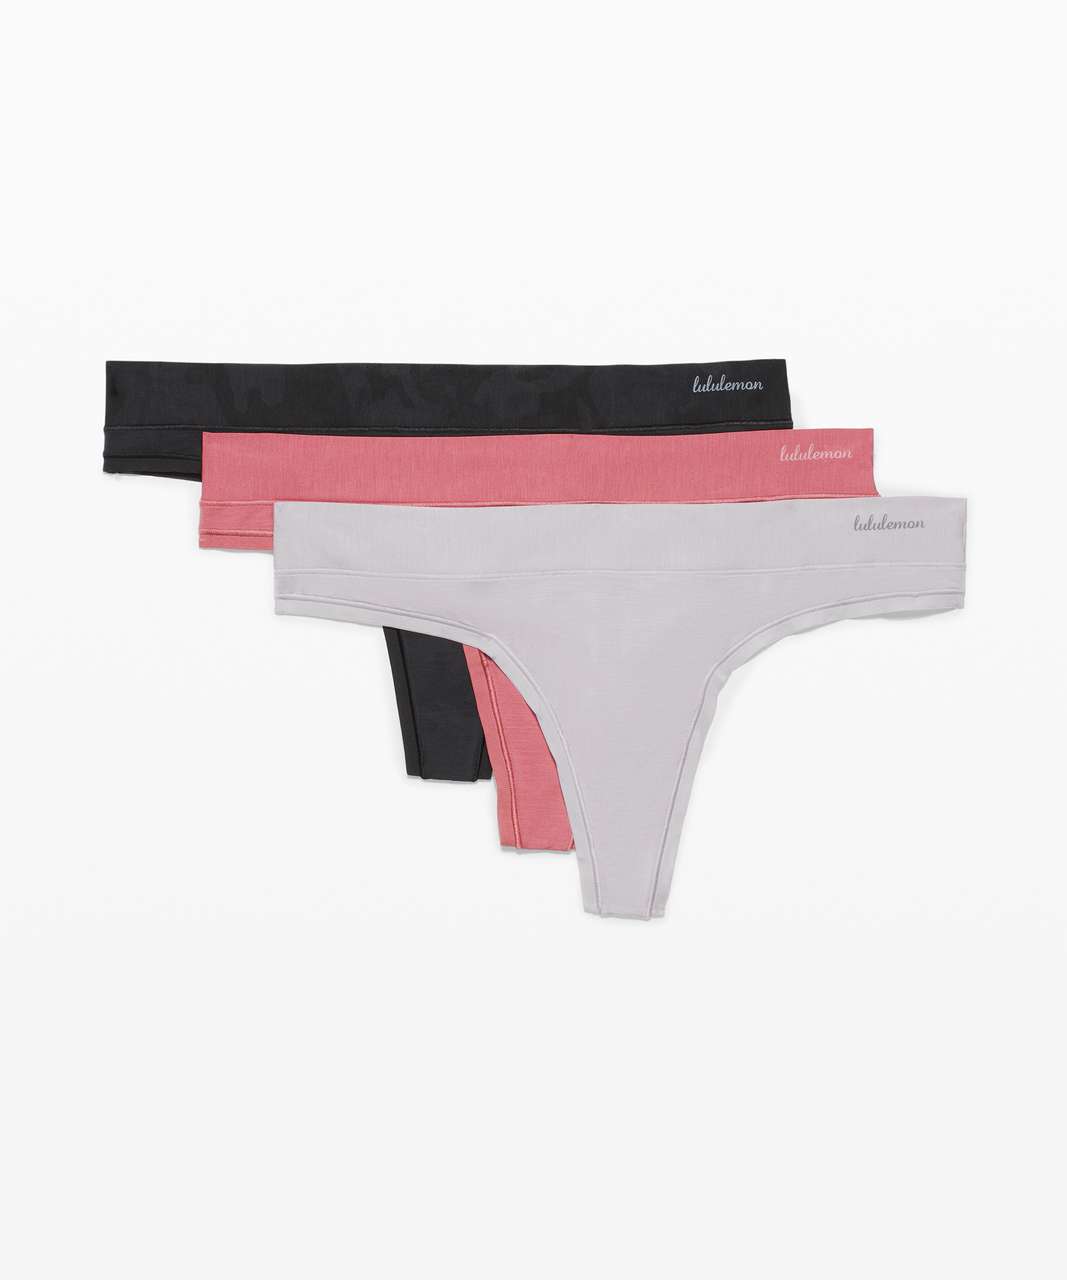 Lululemon Soft Breathable Thong *3 Pack - Incognito Camo Multi Grey / Brier Rose / Chrome